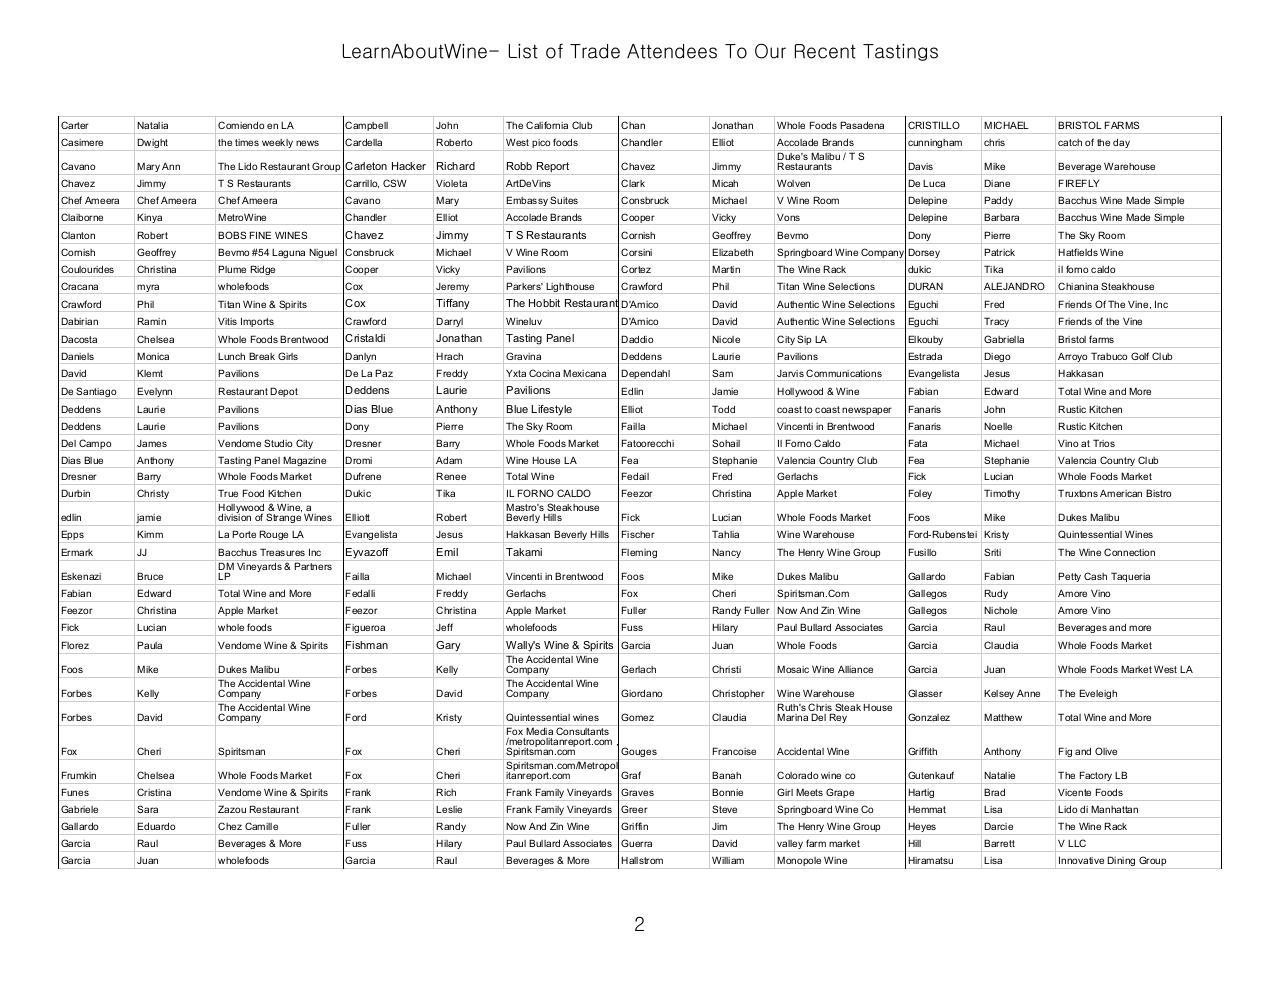 LearnAboutWine- Previous Trade Attendees to Tastings.pdf - page 2/7